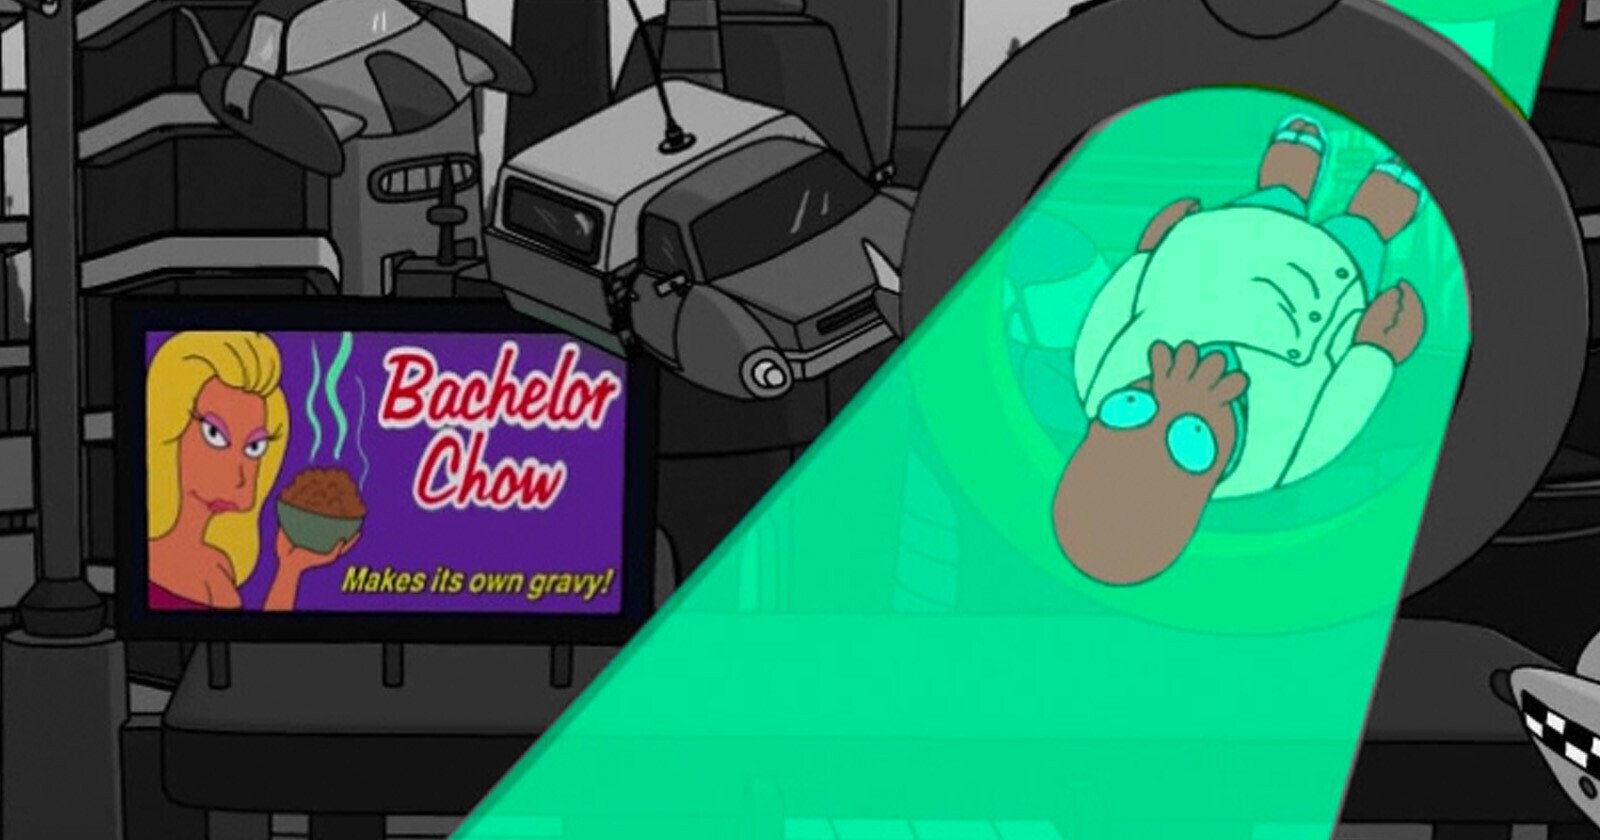 The Best Billboards from the ‘Futurama’ Intro